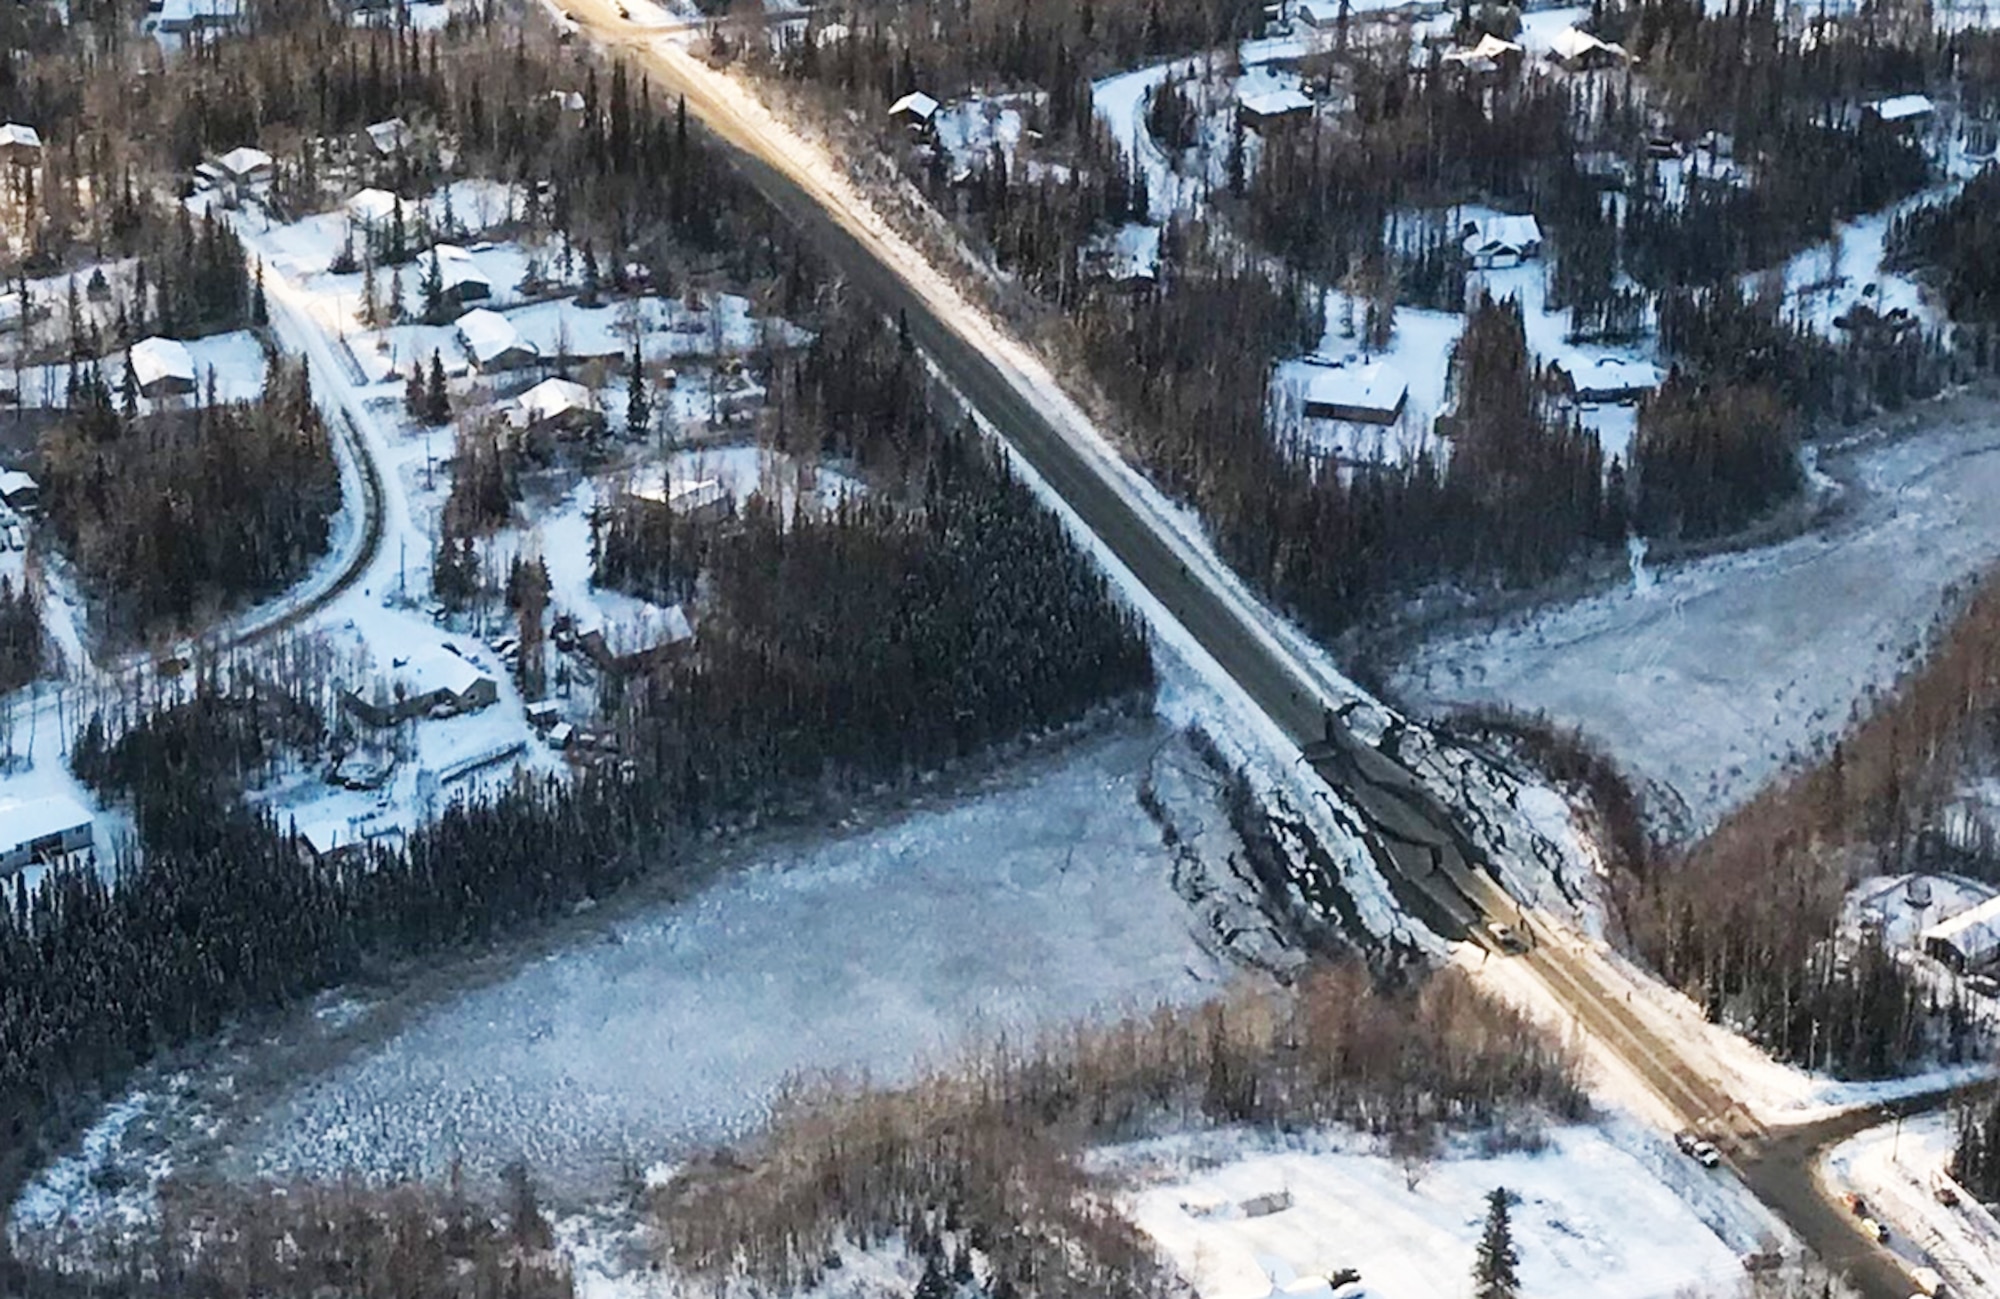 176th Wing members performed an aerial damage assessment in a C-130J "Combat King II" Nov. 30, 2018, over Southcentral, Alaska, following the earthquake that hit the Anchorage and Matanuska-Susitna Valley areas. In a matter of hours, members of the Alaska Air National Guard's Maintenance and Operation groups turned a planned community engagement into an aerial survey of earthquake damage, reporting findings to the State of Alaska's Joint Operations Center.